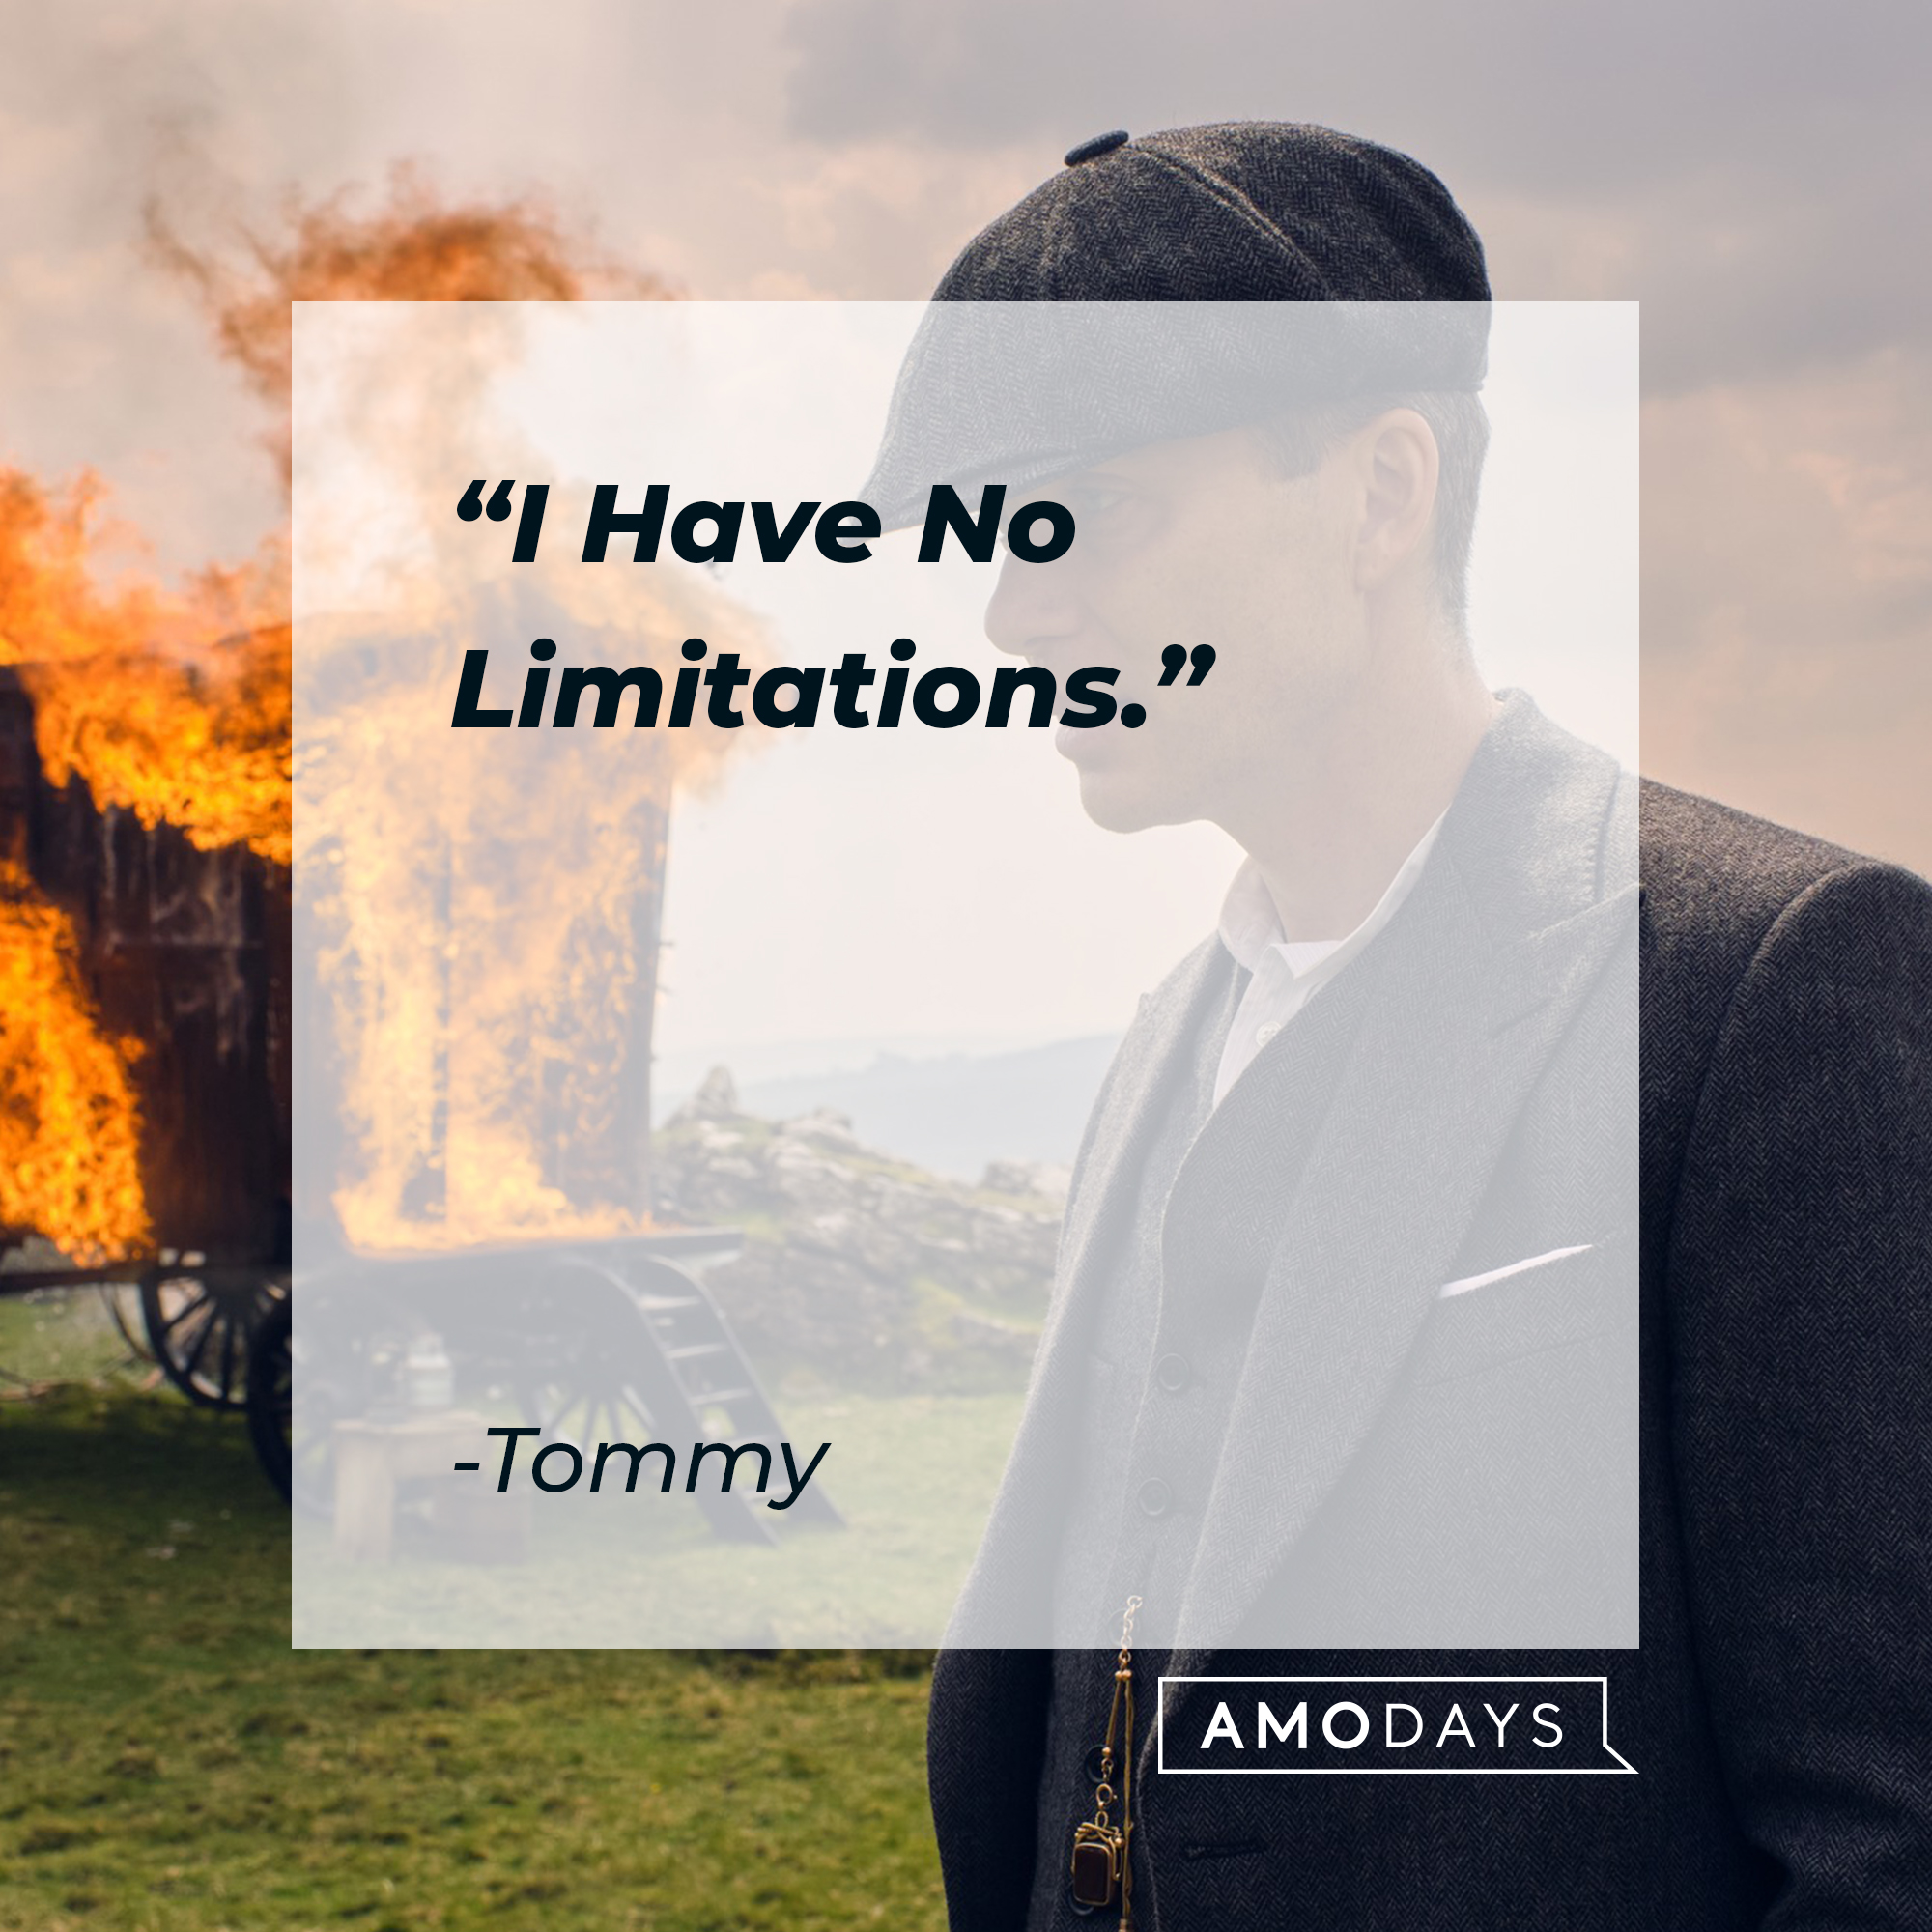 Tommy's quote: " I Have No Limitations." | Source: facebook.com/PeakyBlinders